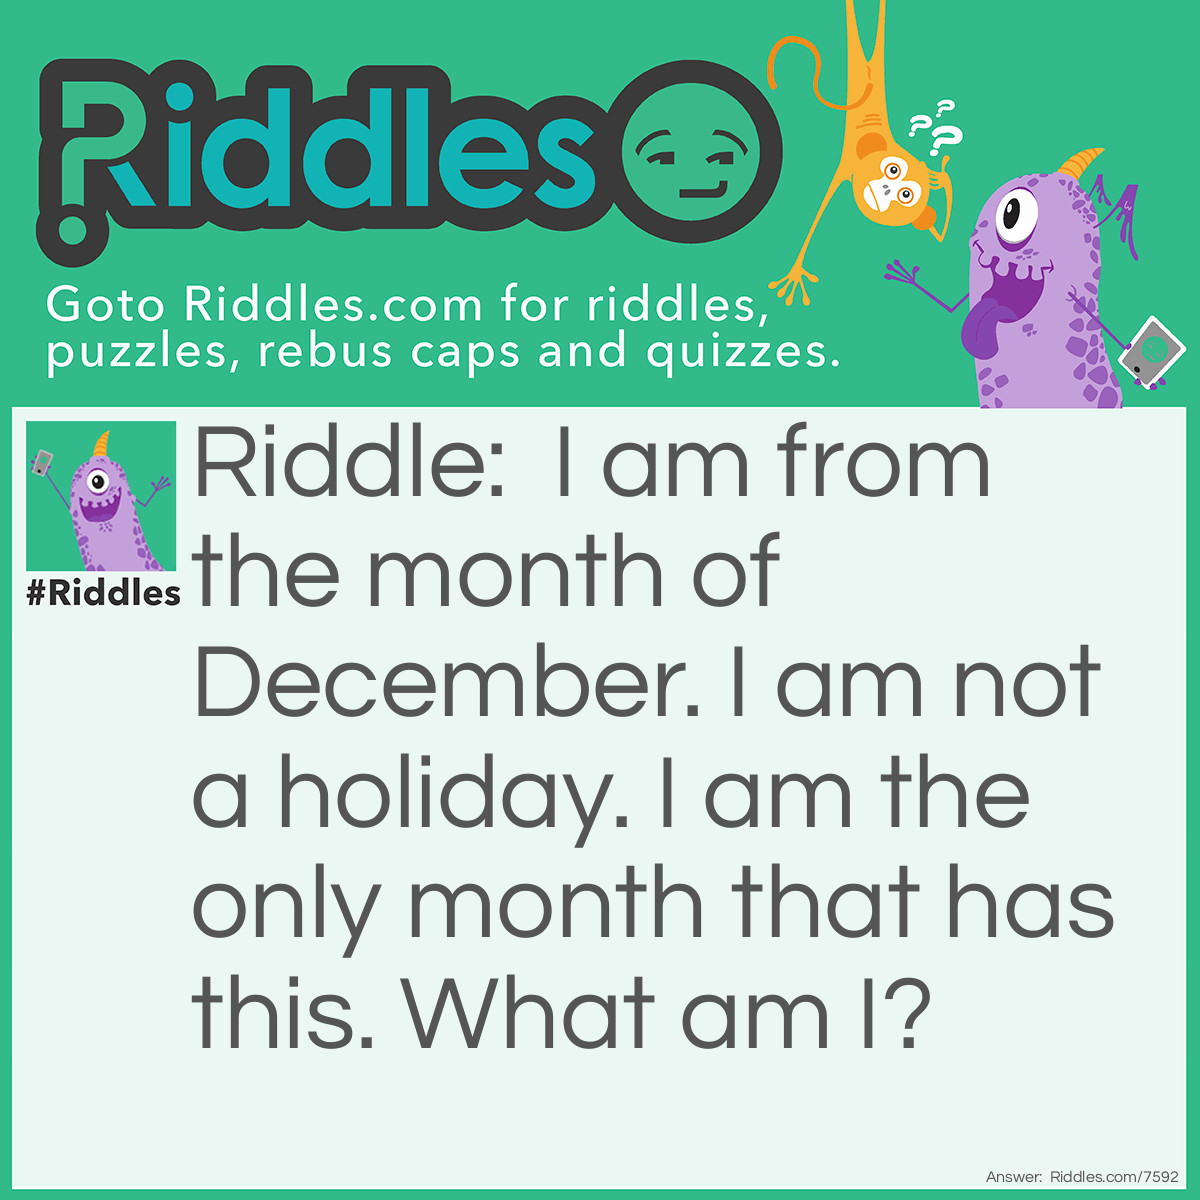 Riddle: I am from the month of December. I am not a holiday. I am the only month that has this. What am I? Answer: The letter D. The first letter of the month.